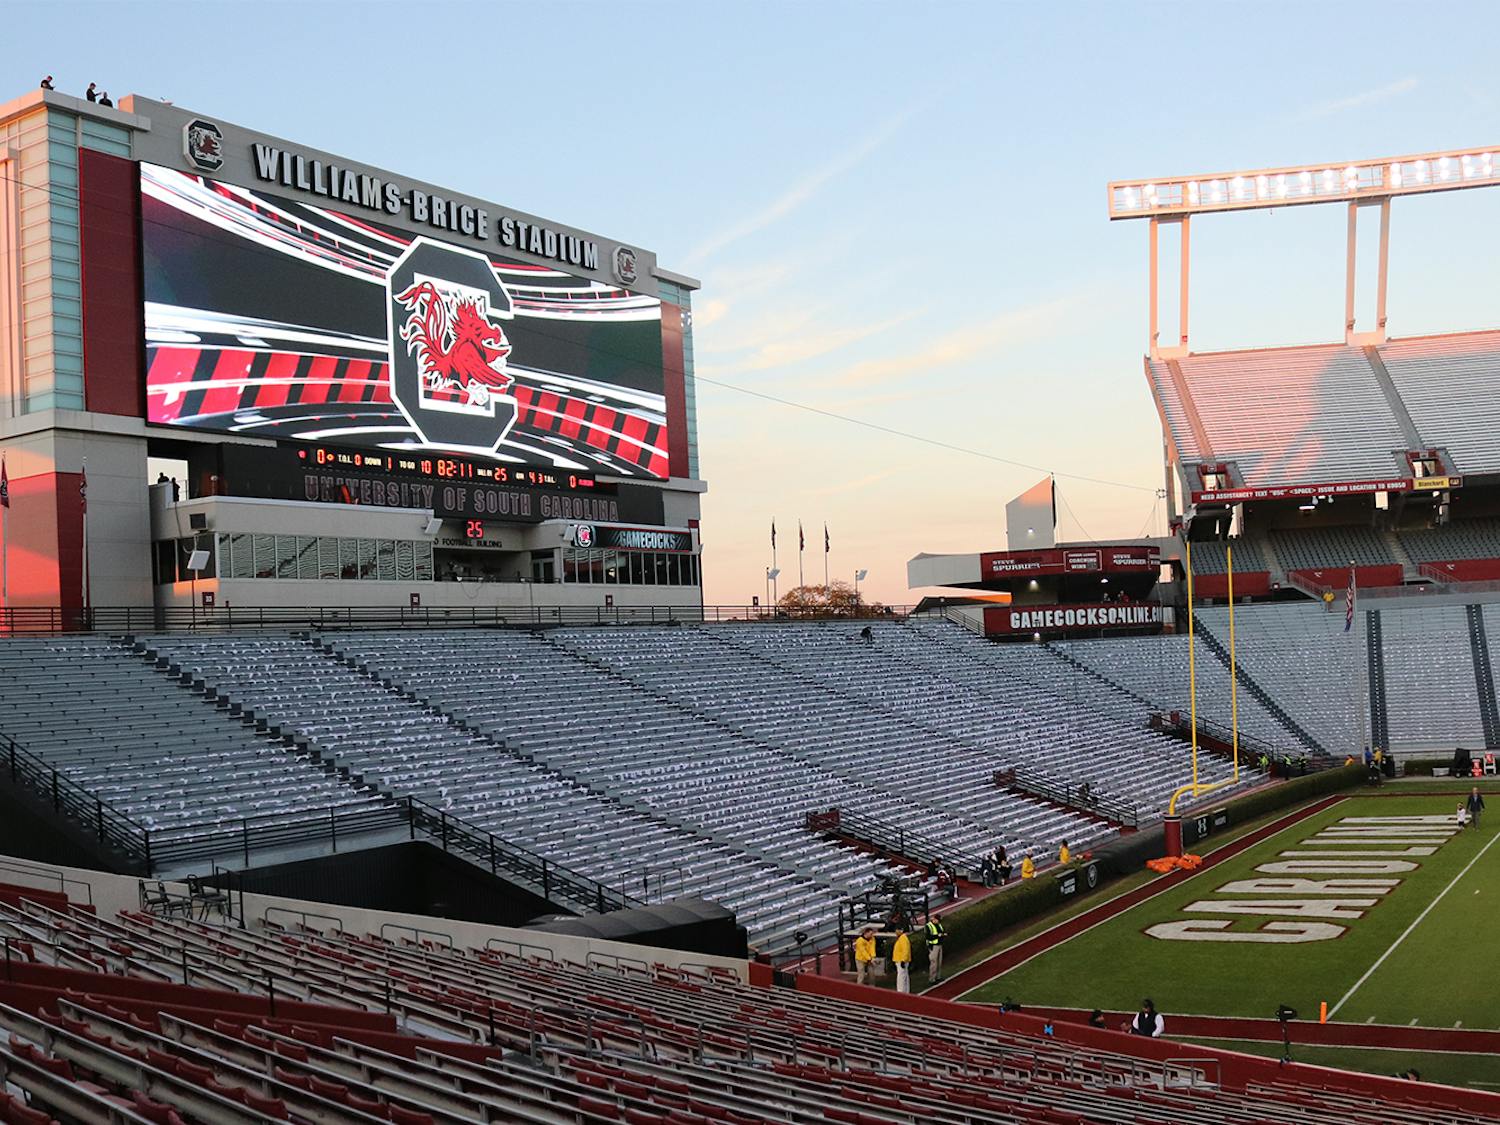 FILE— The inside of an empty Williams-Brice Stadium at the University of South Carolina in Columbia, South Carolina.